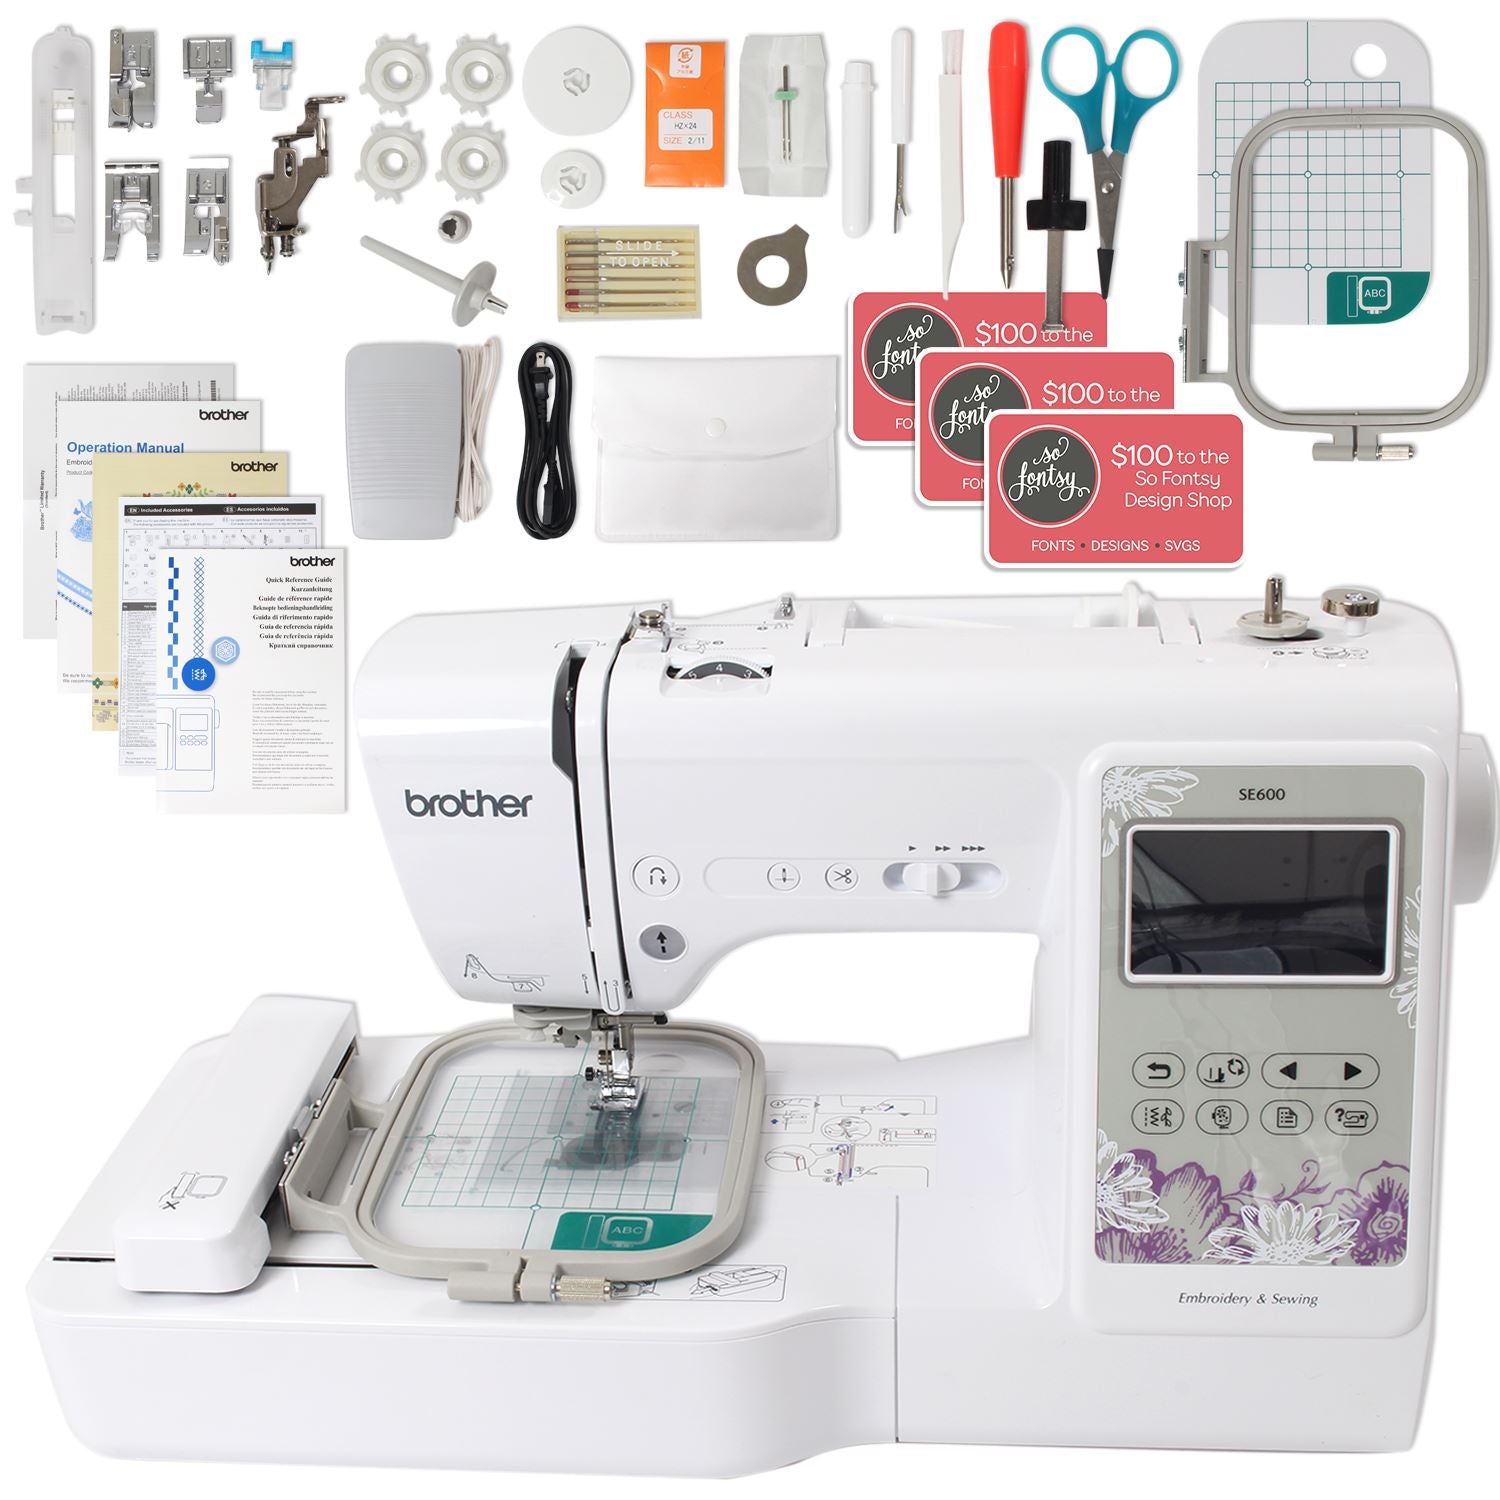 Buy Brand New - Brother Computerized Embroidery Sewing Machine W